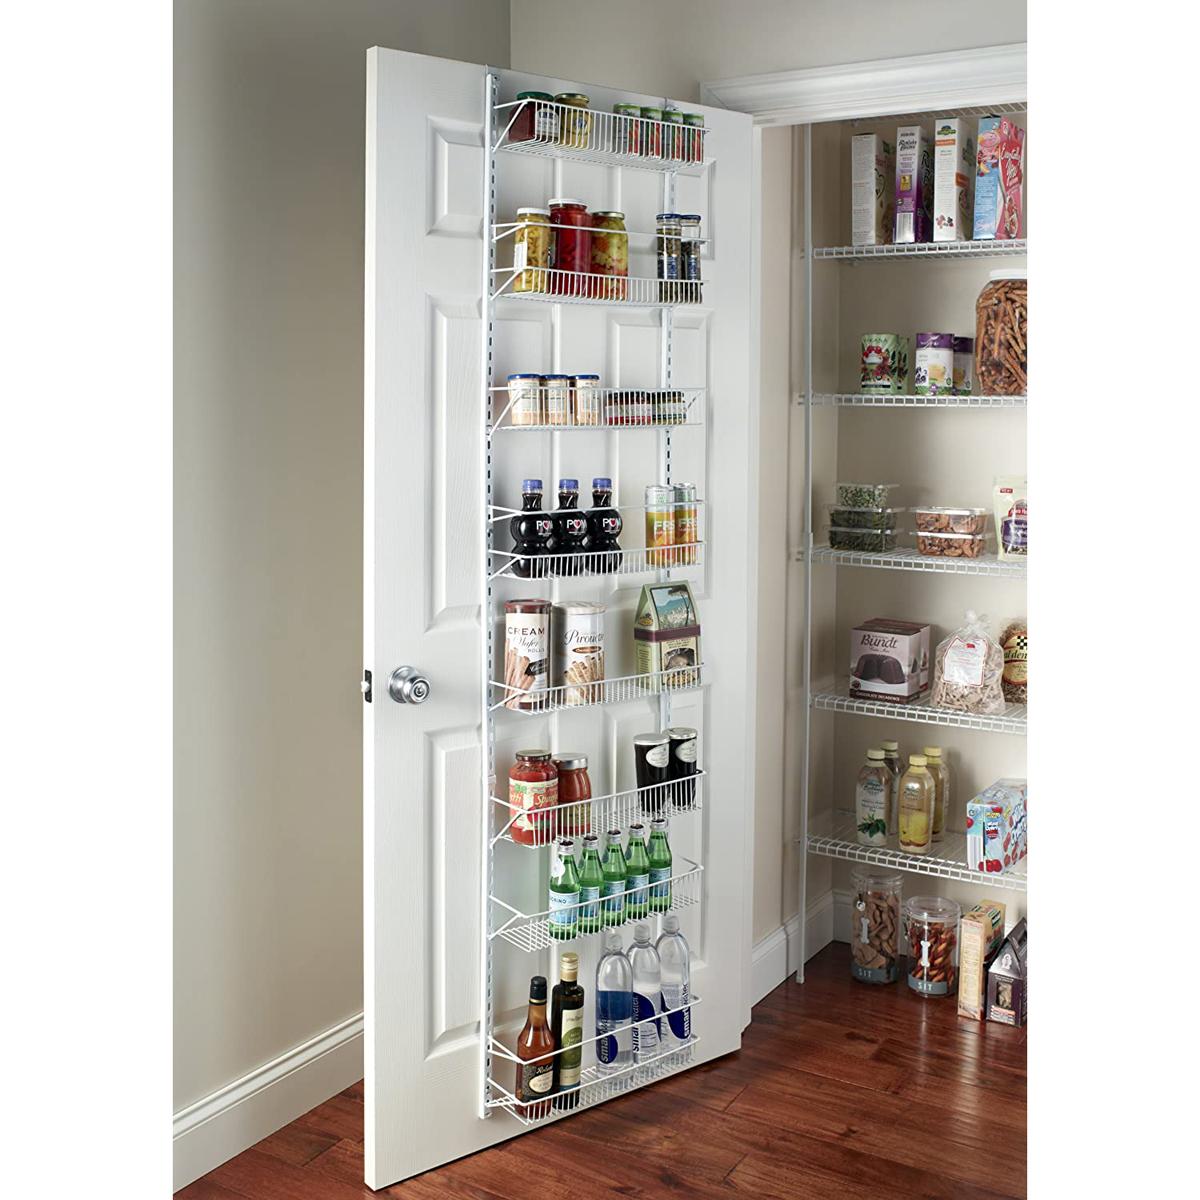 ClosetMaid Adjustable 8-Tier Wall and Door Rack for $33.99 Shipped